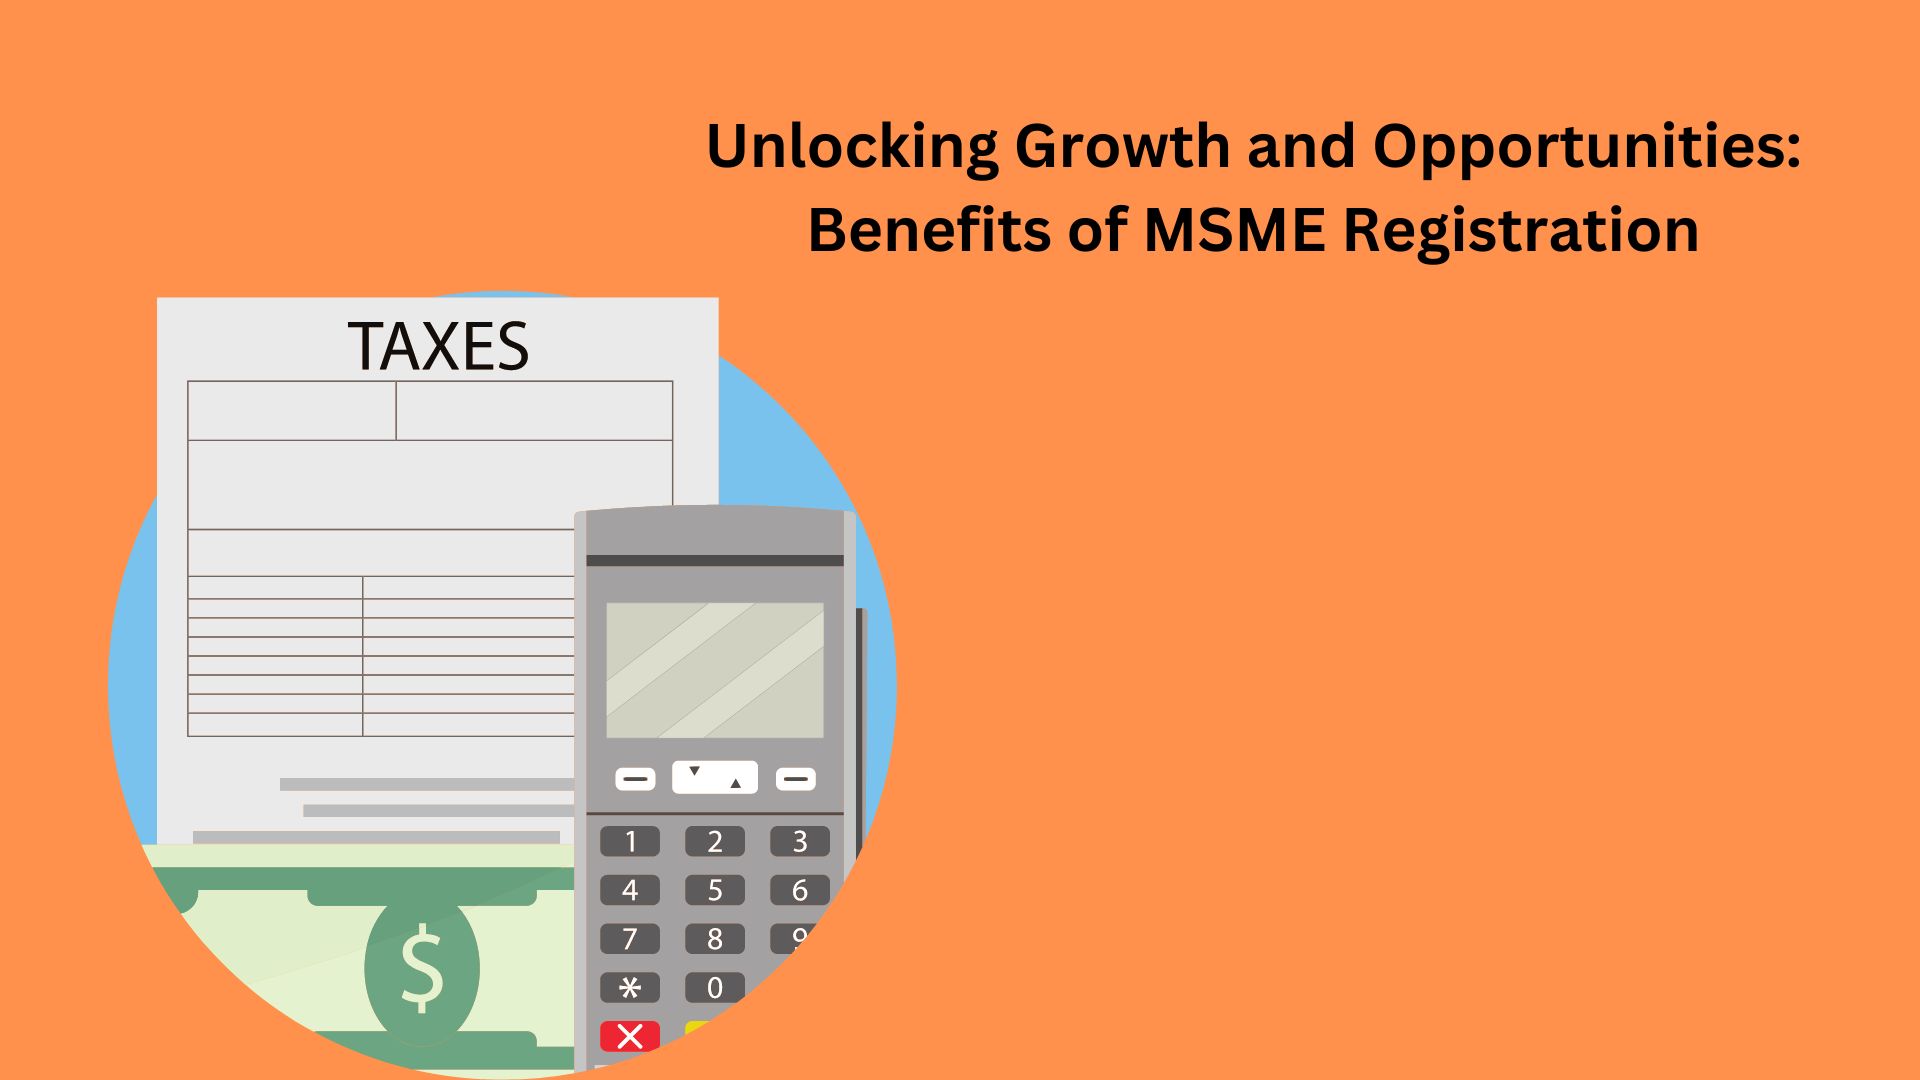 Unlocking Growth and Opportunities: Benefits of MSME Registration